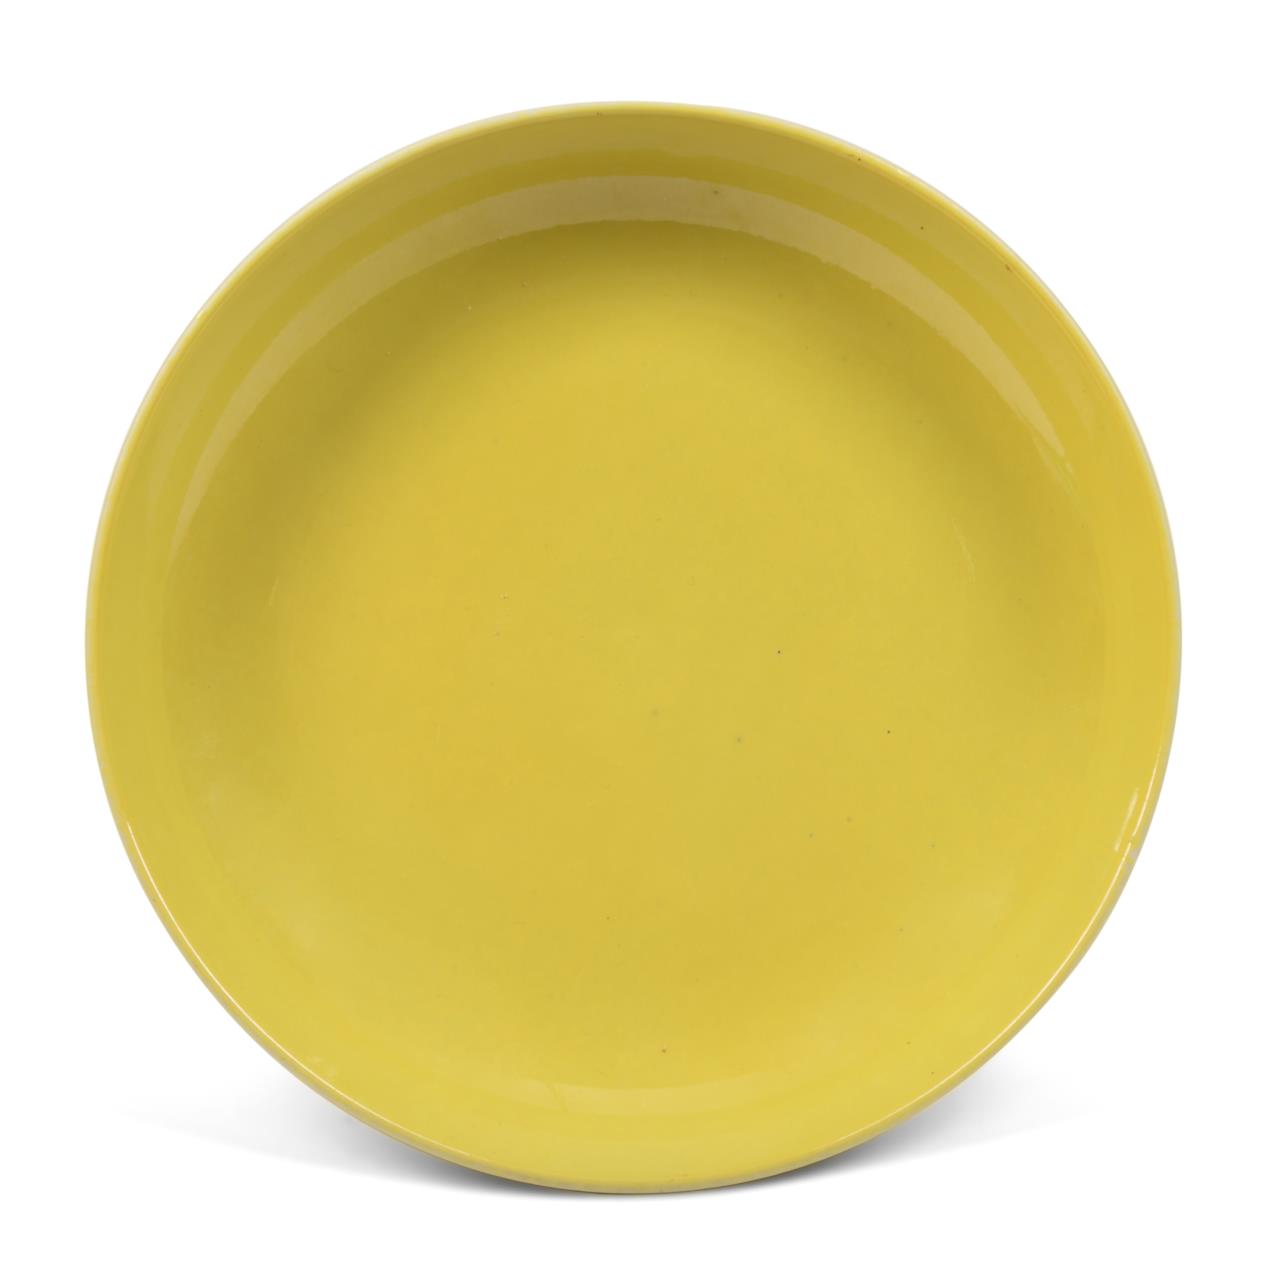 CHINESE IMPERIAL YELLOW GLAZED 2f9b98